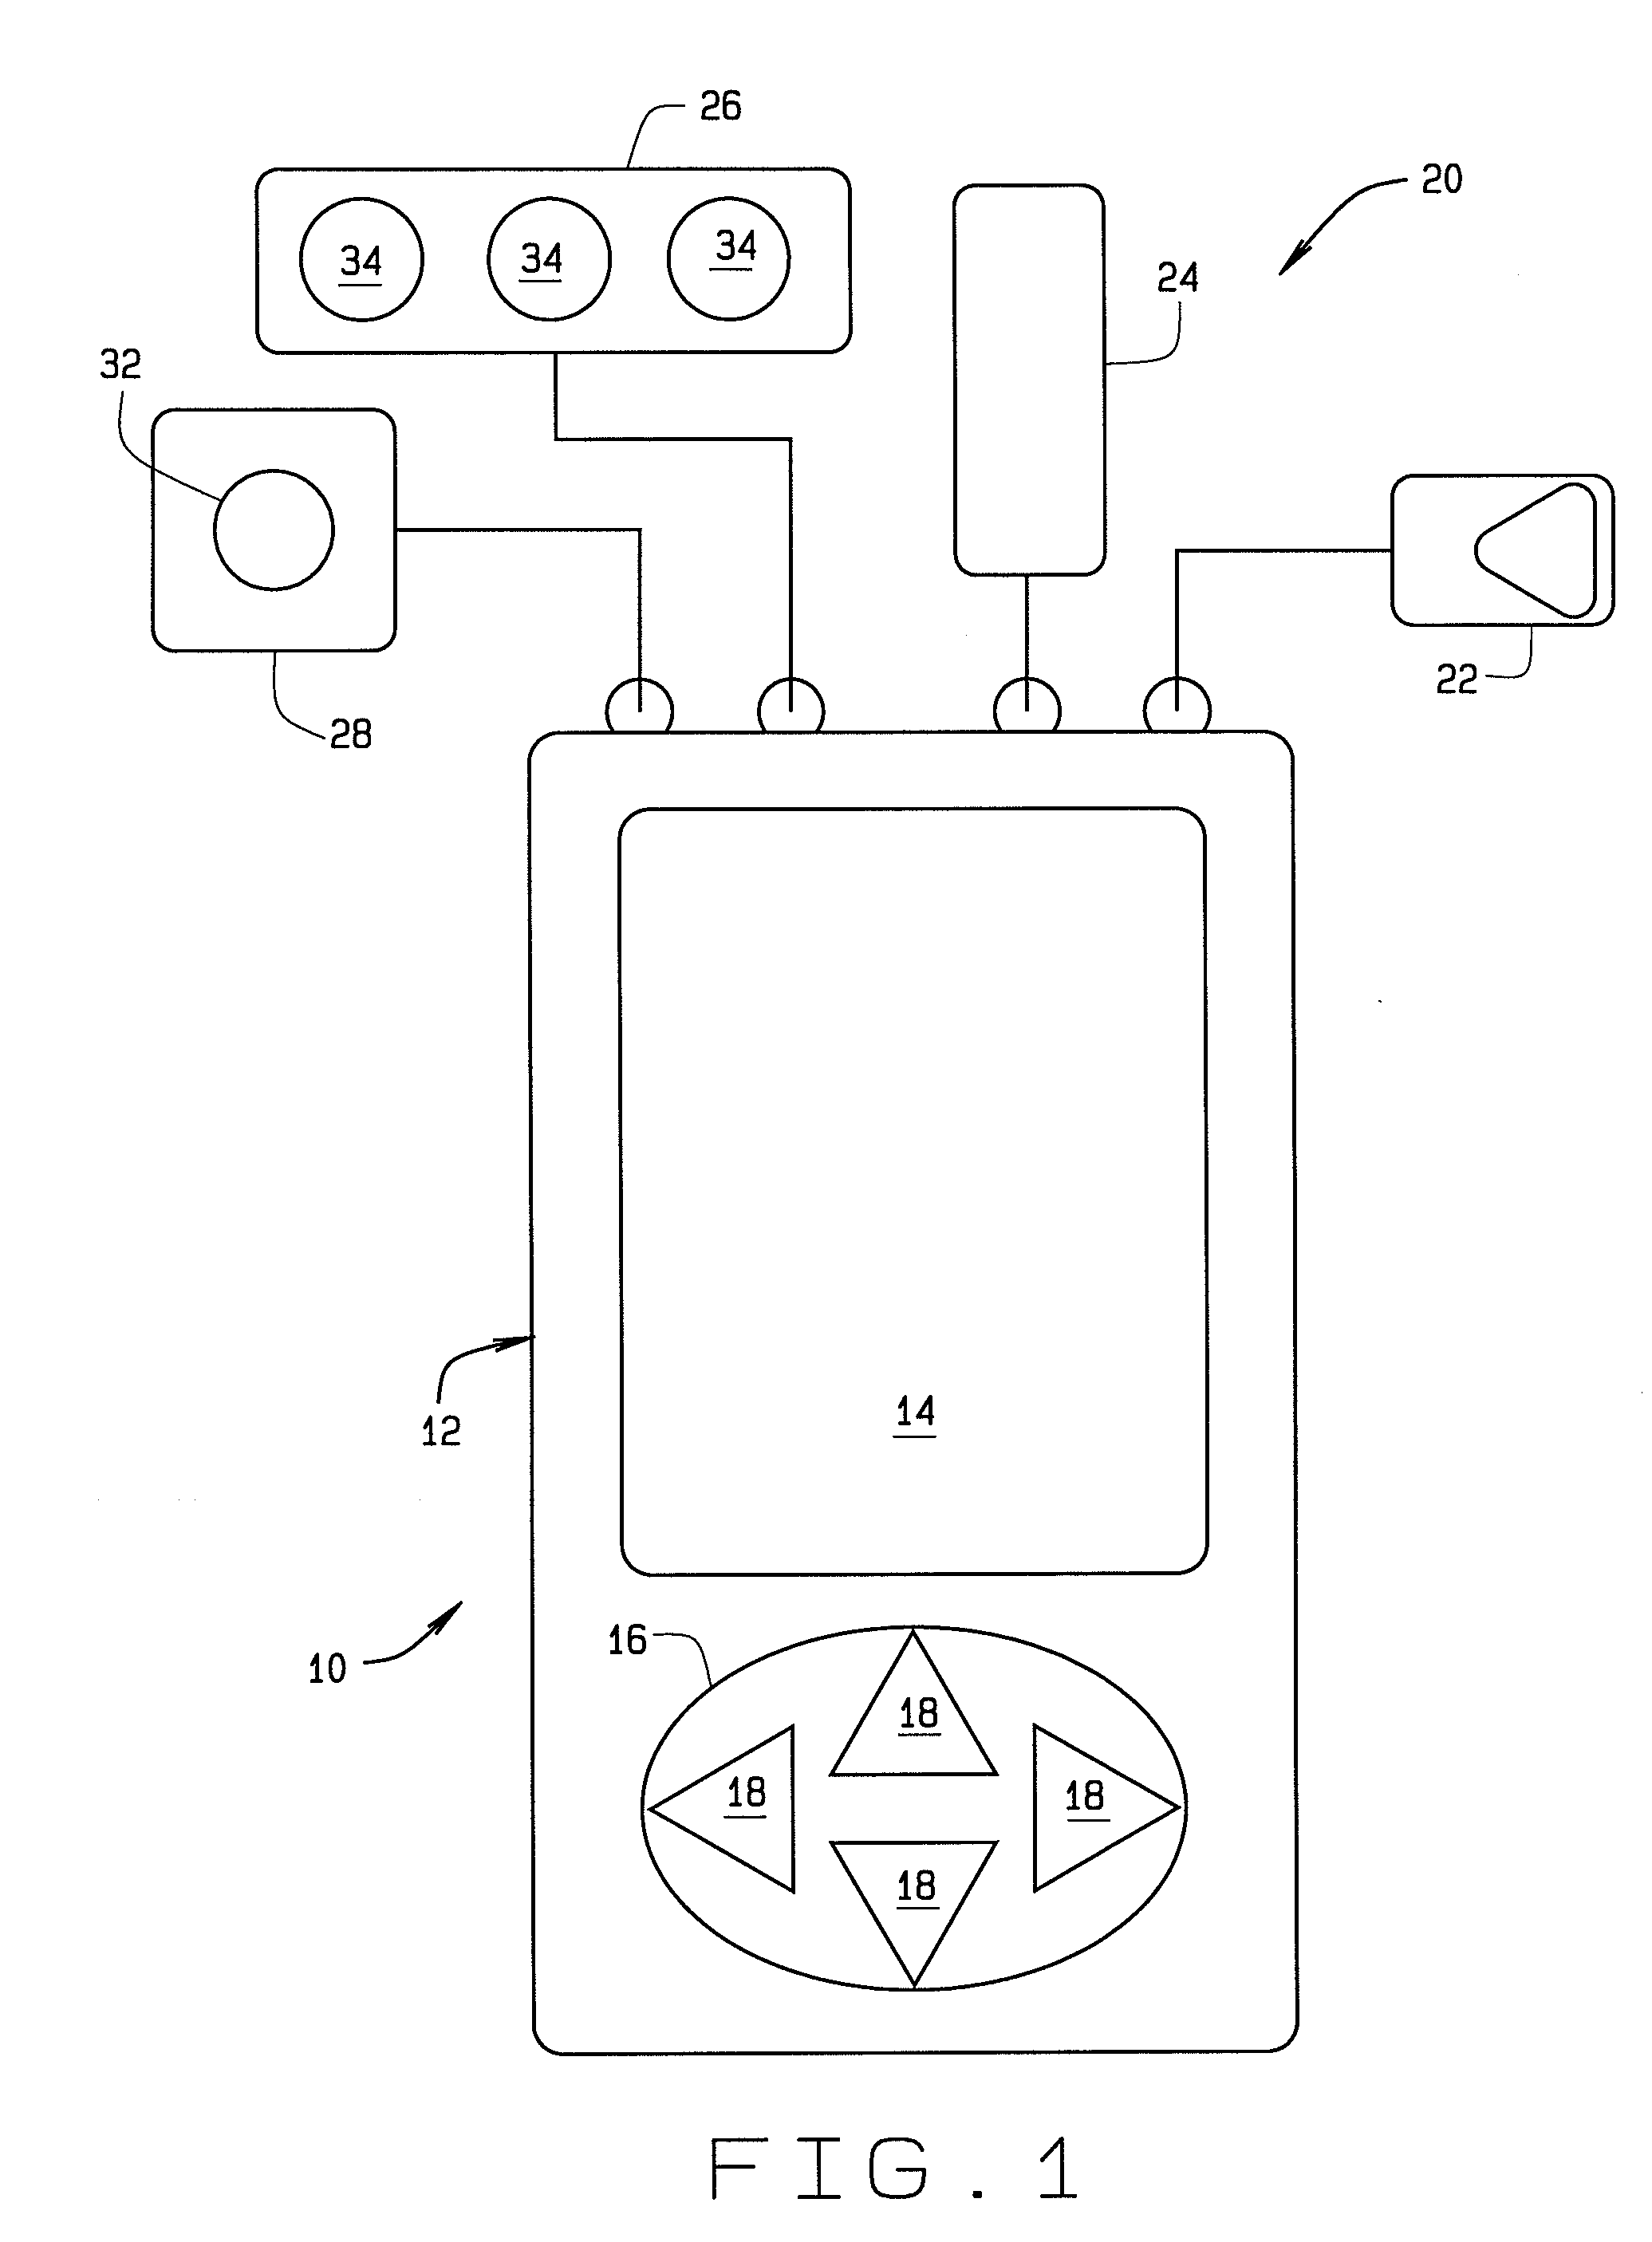 Integrated Portable Anesthesia and Sedation Monitoring Apparatus